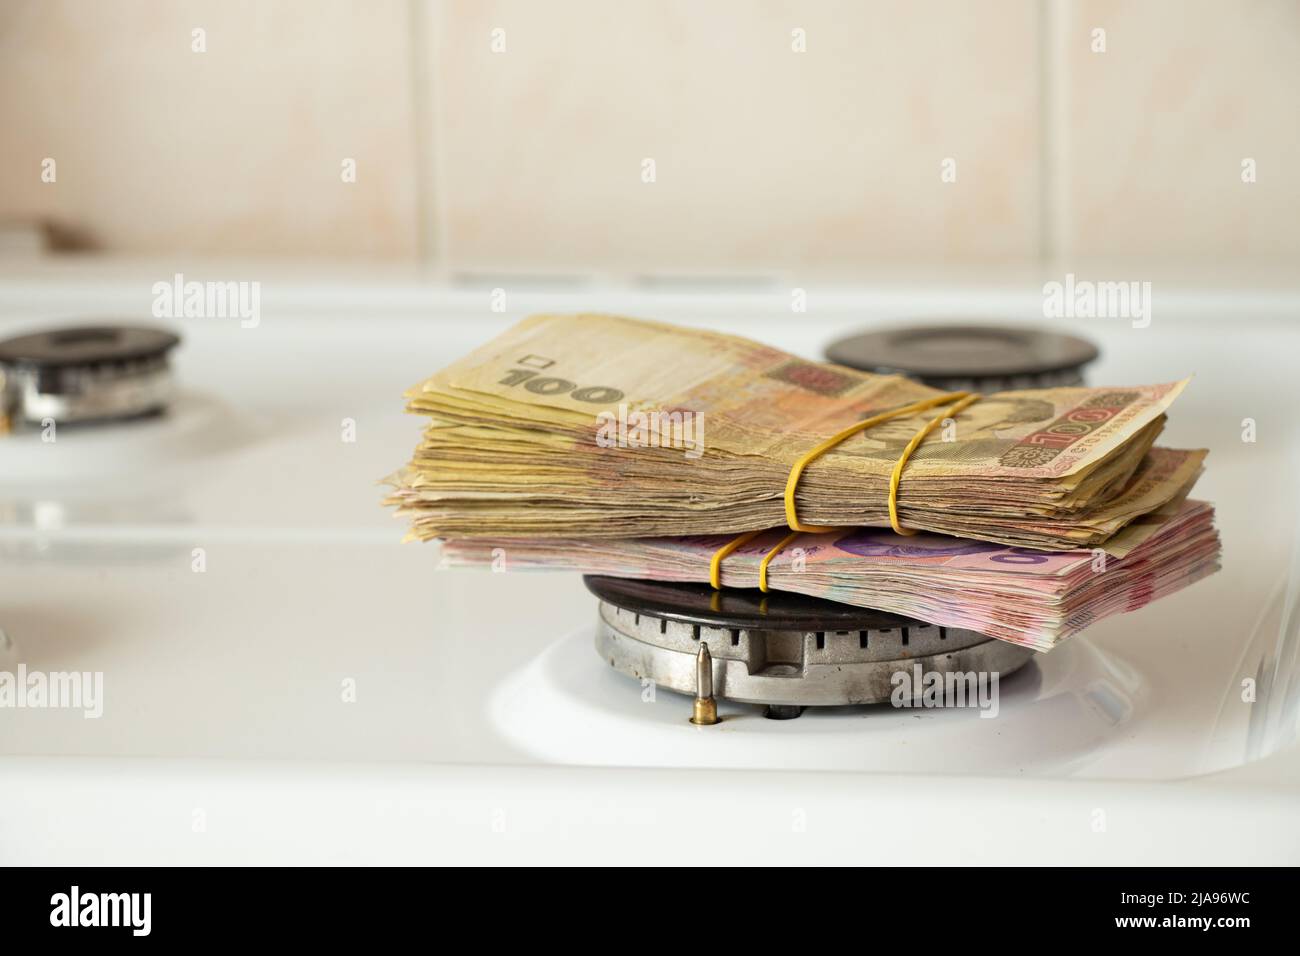 One hundred and two hundred hryvnia lie on a gas stove in the kitchen, Ukrainian hryvnia and gas, finance and economics, money and sanctions Stock Photo